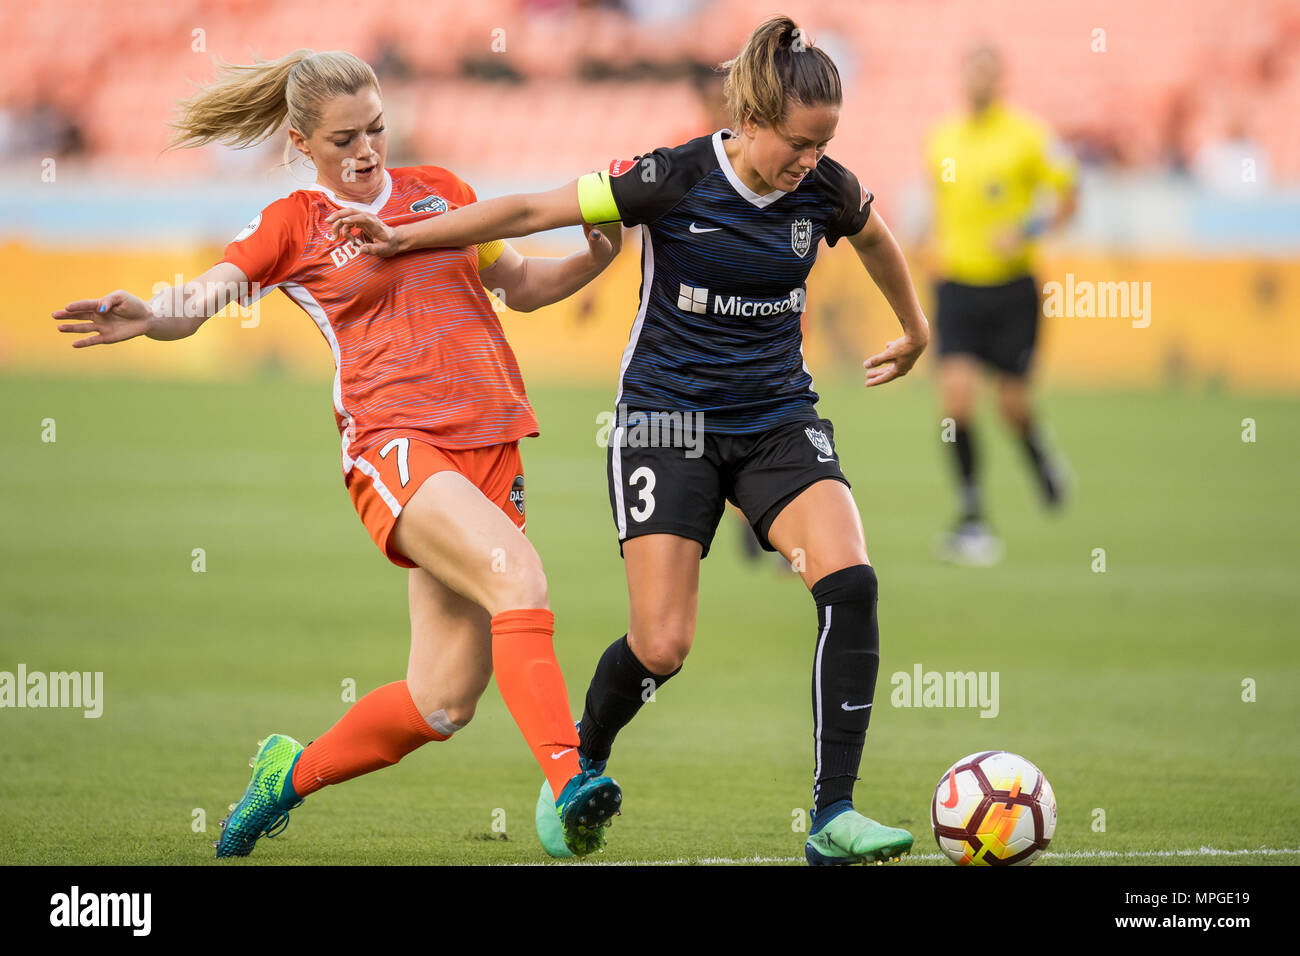 Houston, TX, USA. 23rd May, 2018. Seattle Reign FC defender Lauren Barnes (3) controls the ball in front of Houston Dash forward Kealia Ohai (7) during a NWSL soccer match between the Houston Dash and the Seattle Reign at BBVA Compass Stadium in Houston, TX. The Dash won 2 to 1.Trask Smith/CSM/Alamy Live News Stock Photo